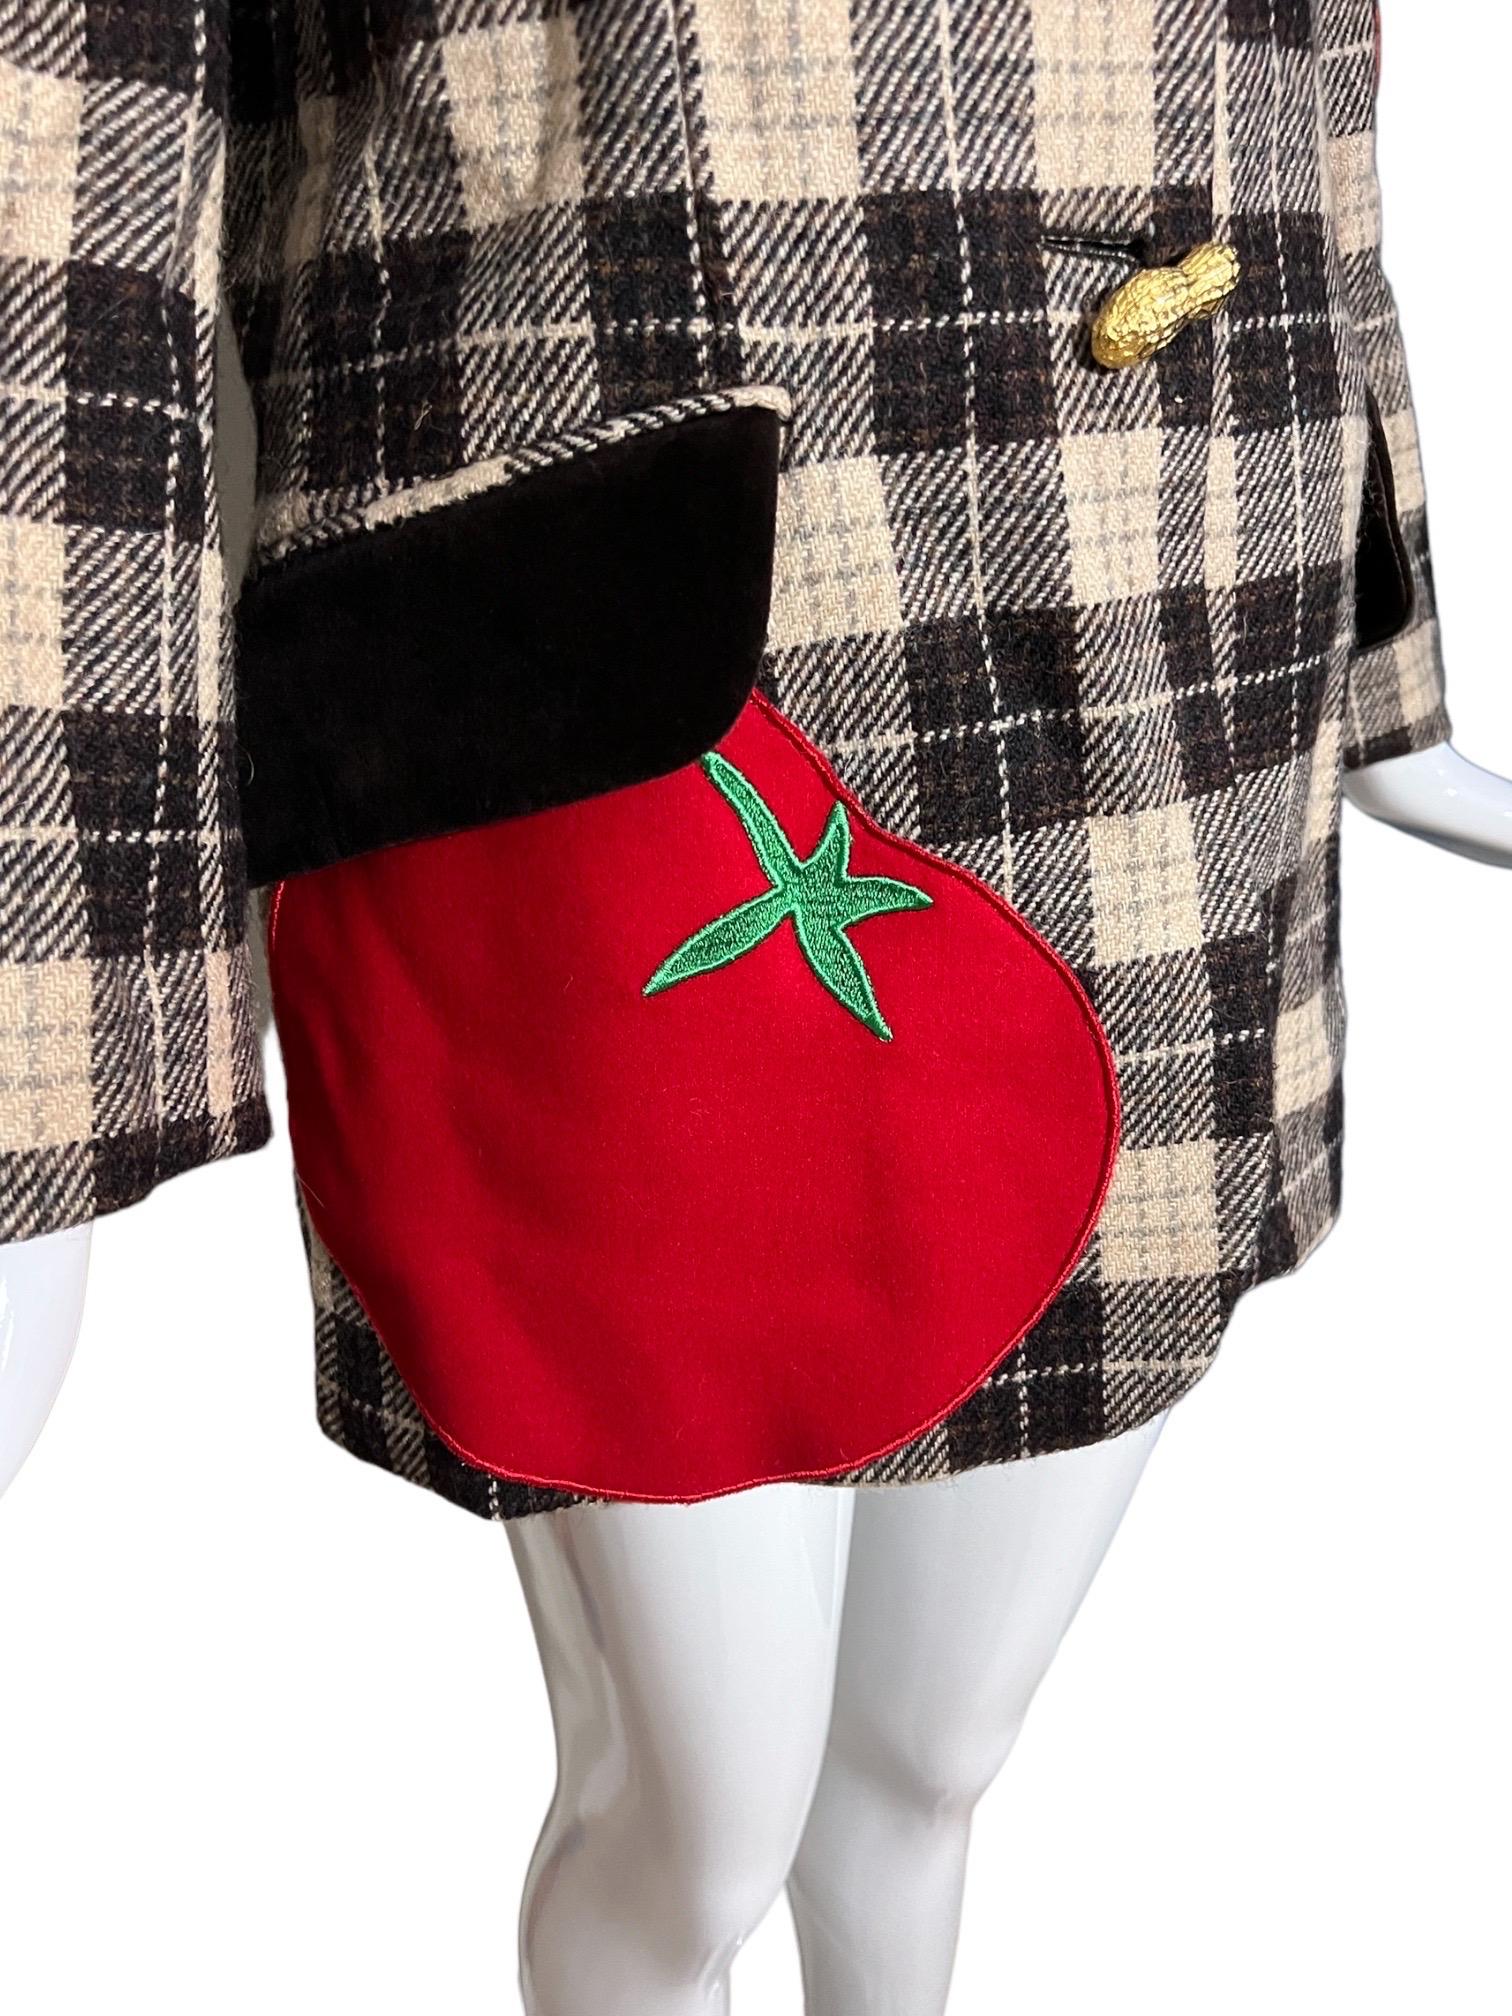 Moschino Cheap & Chic Vintage Vegetable Jacket as seen on the Nanny 3